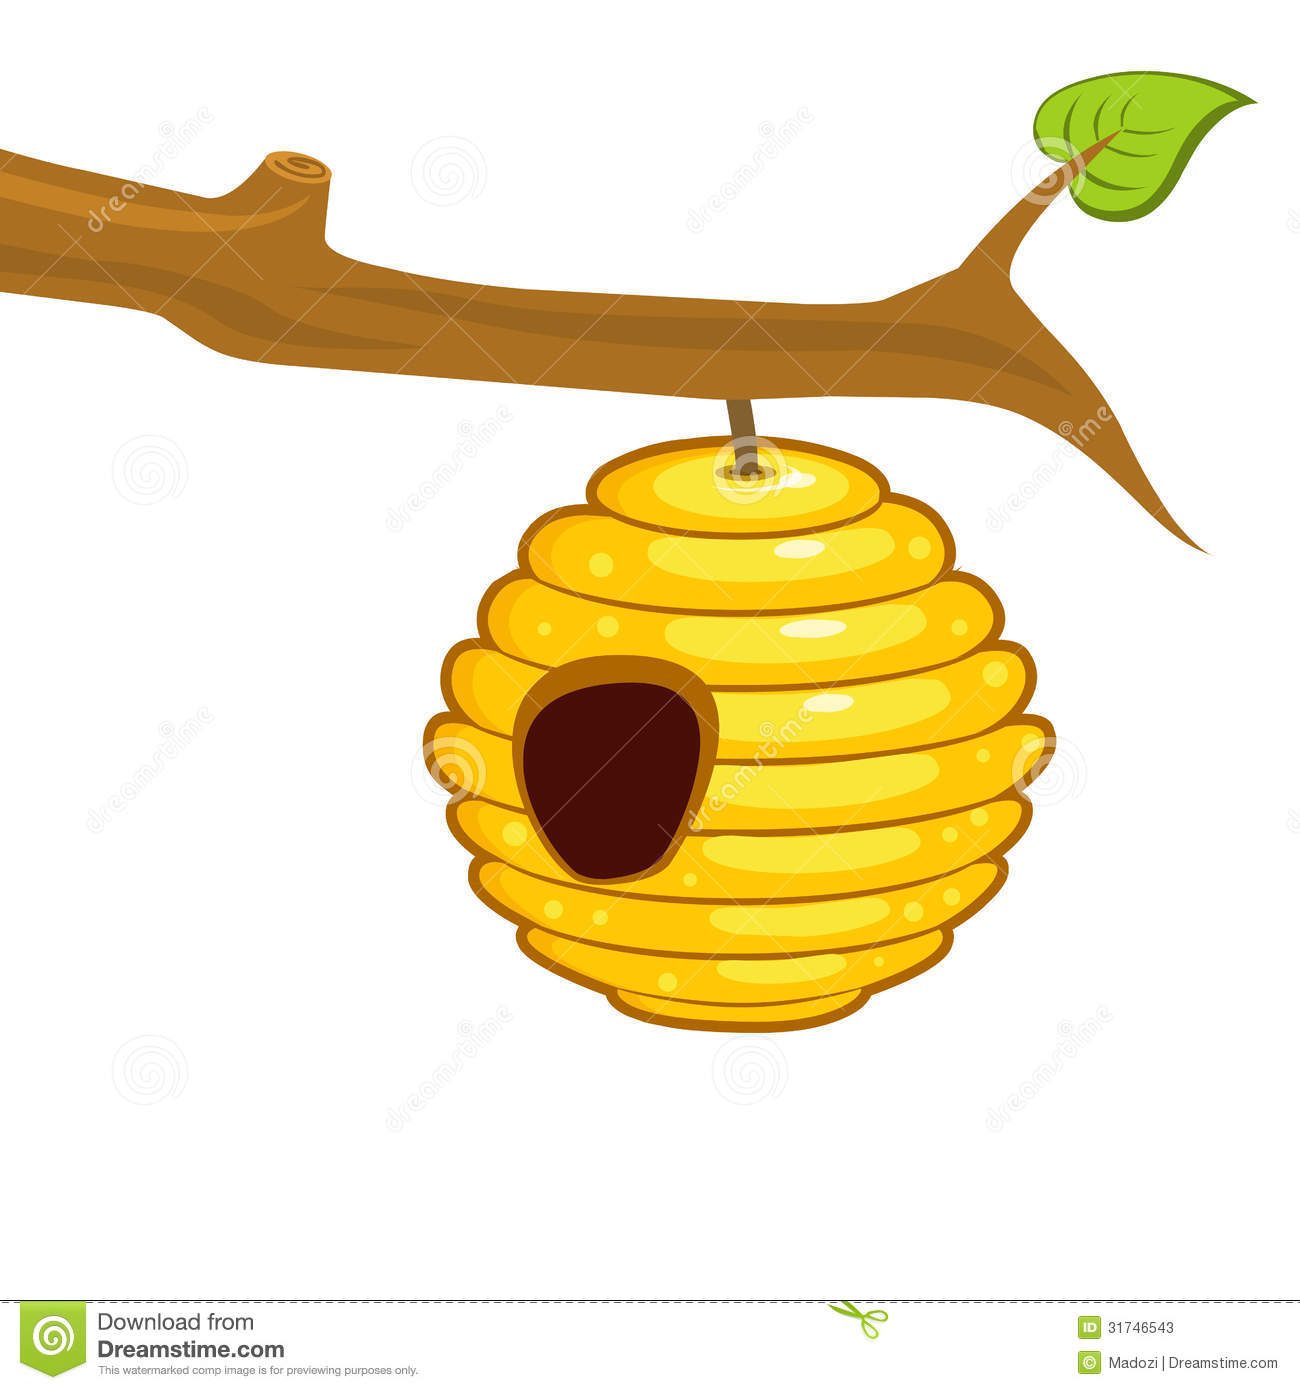 beehive clipart. beehive: ill